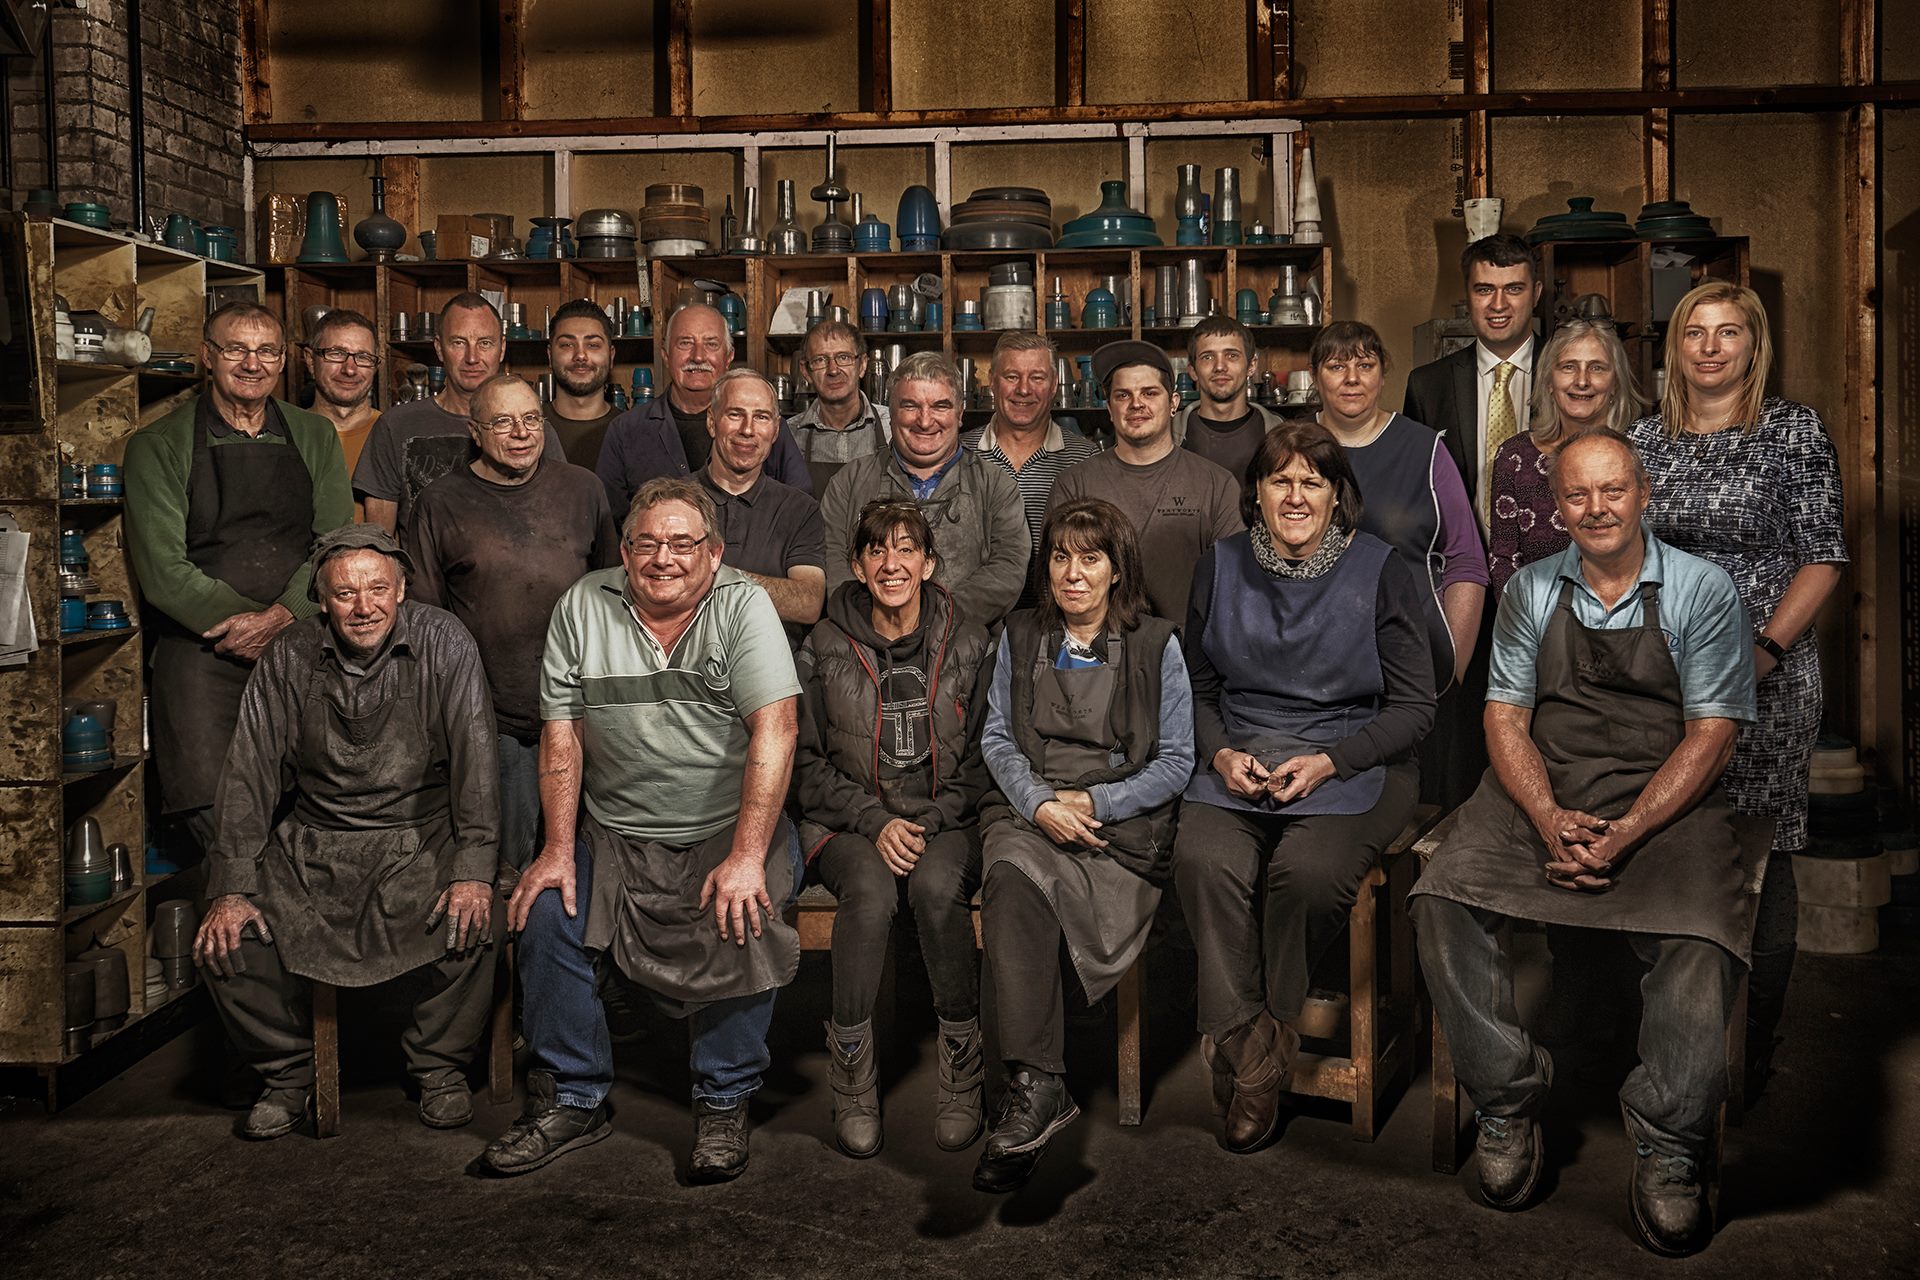 22 people pose in three rows in a workshop. The people in the front row are seated on stools and the majority of people featured are wearing aprons. Behind the people are shelves featuring various examples of part-made pewter objects and other items related to their production.